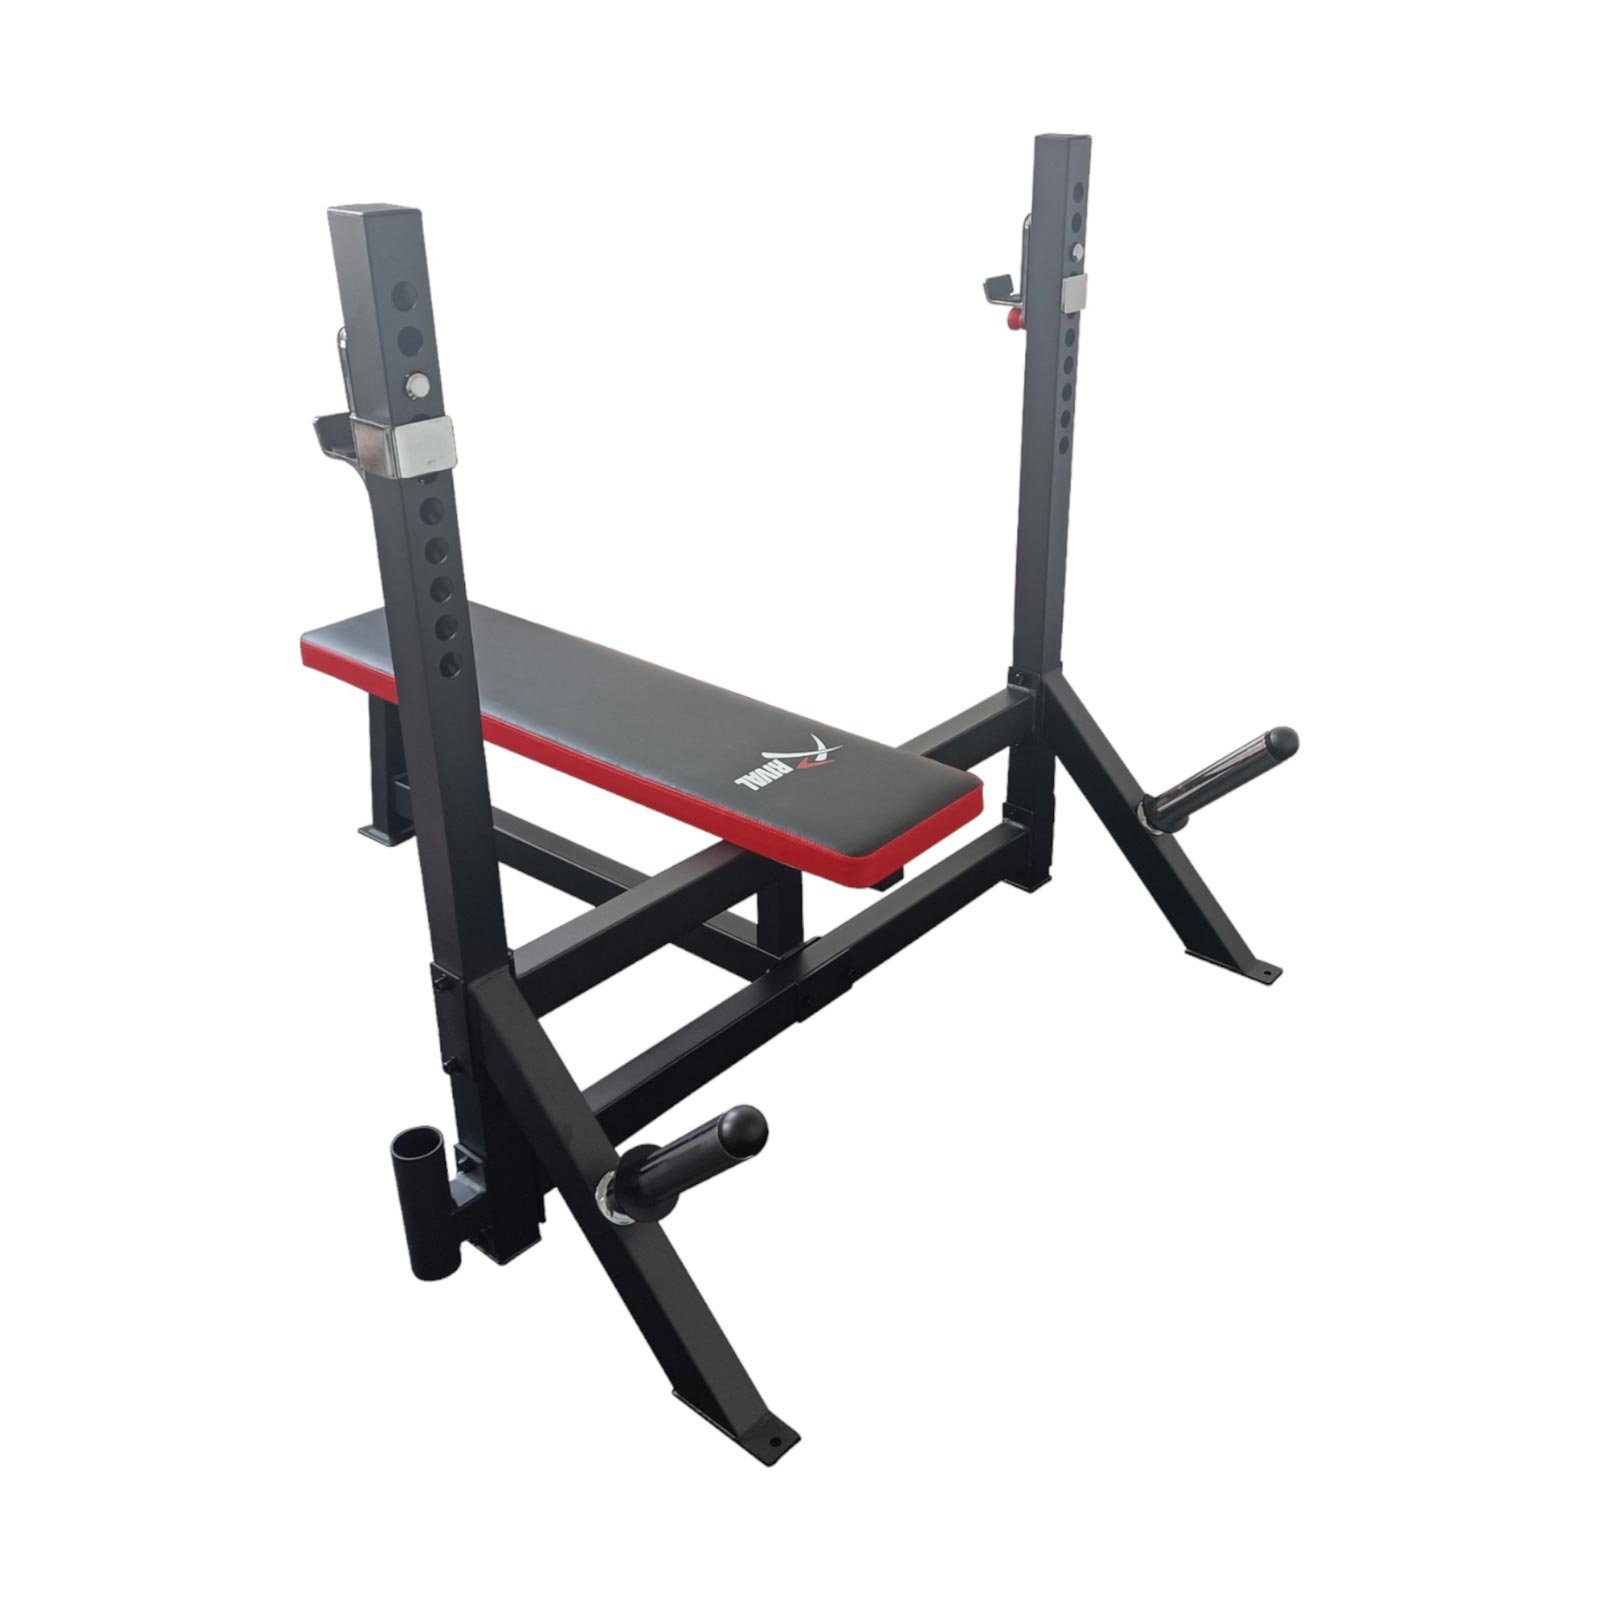 RIVAL FLAT OLYMPIC WEIGHT BENCH